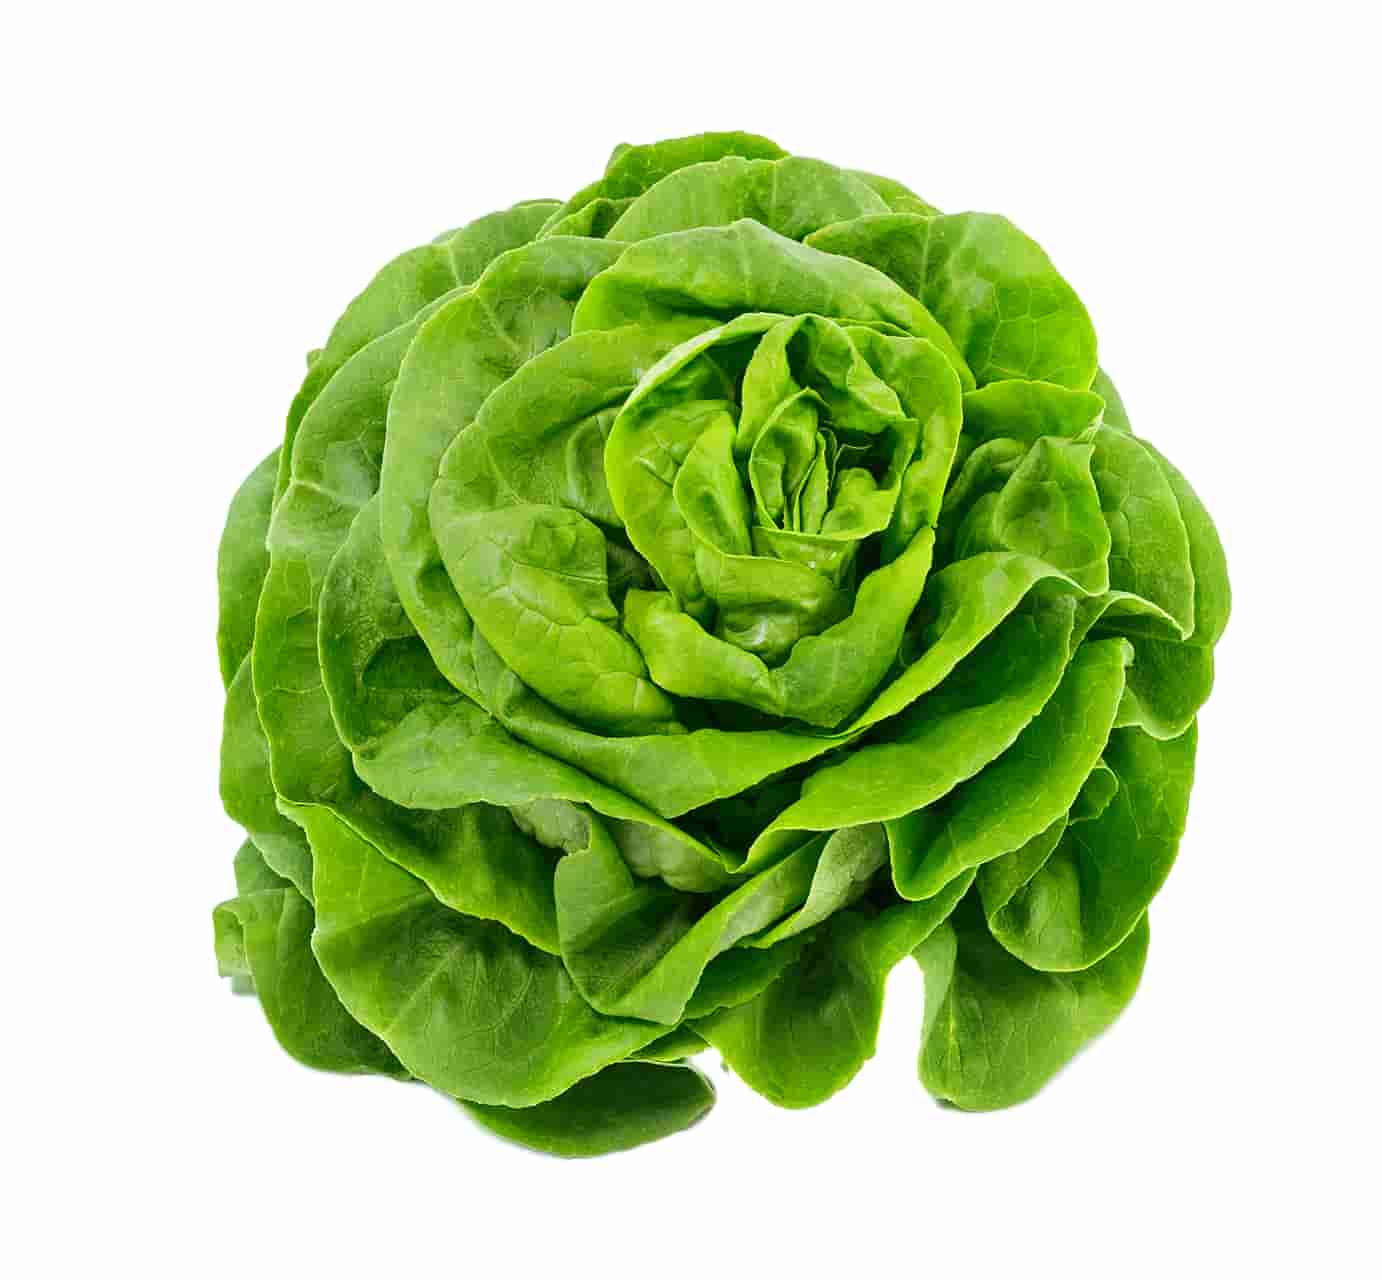 Lettuce Seeds for Your Farm: Royal Seed presents a collection of lettuce seeds for a crisp harvest. Explore various types by clicking here to visit our lettuce page